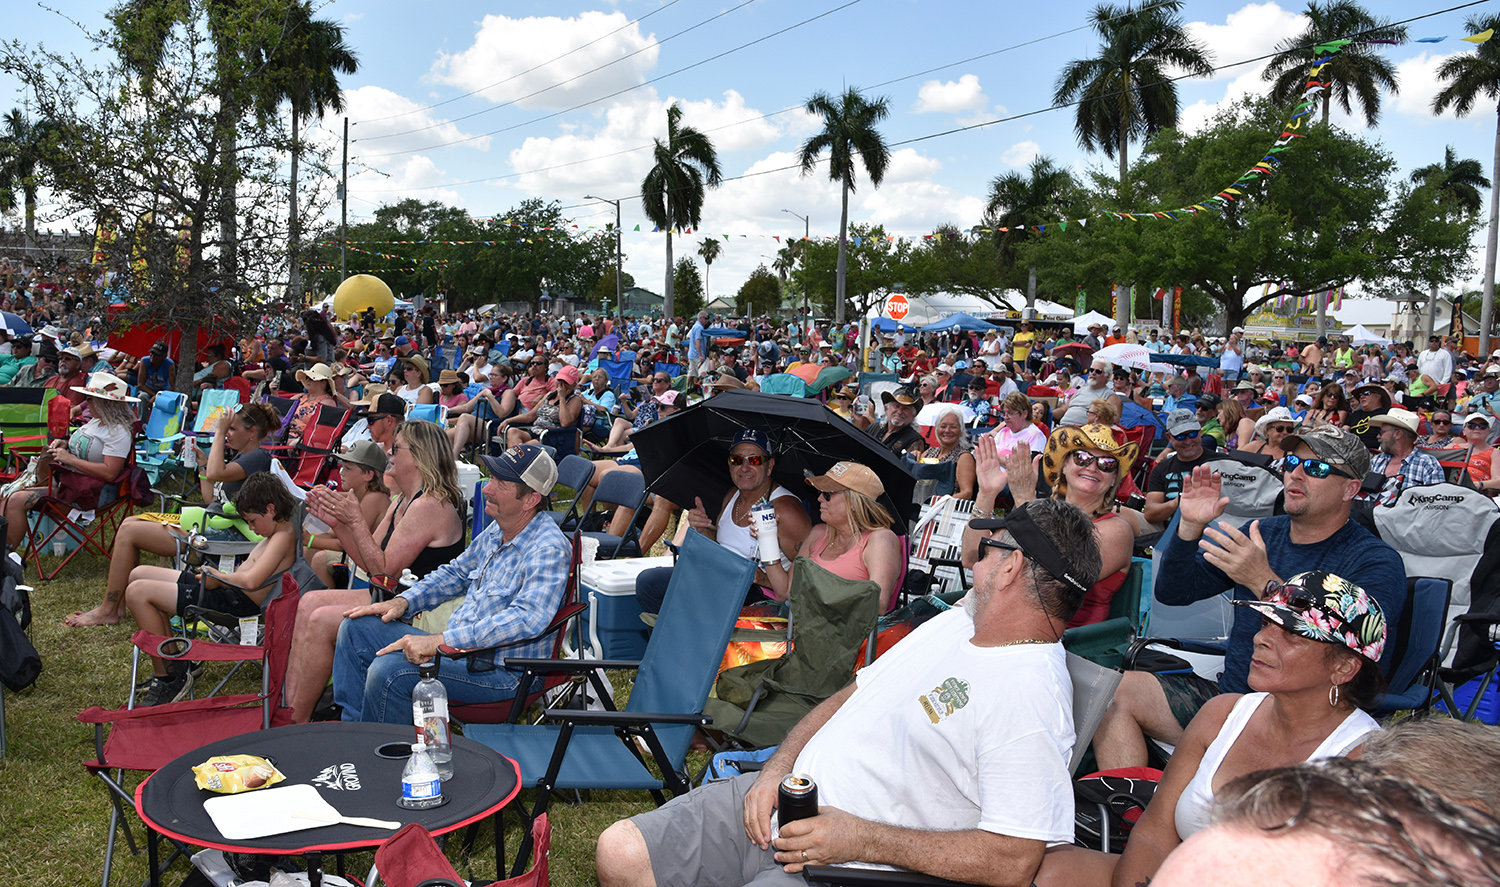 Crowds enjoy musical entertainment at the 2022 Clewiston Sugar Festival.